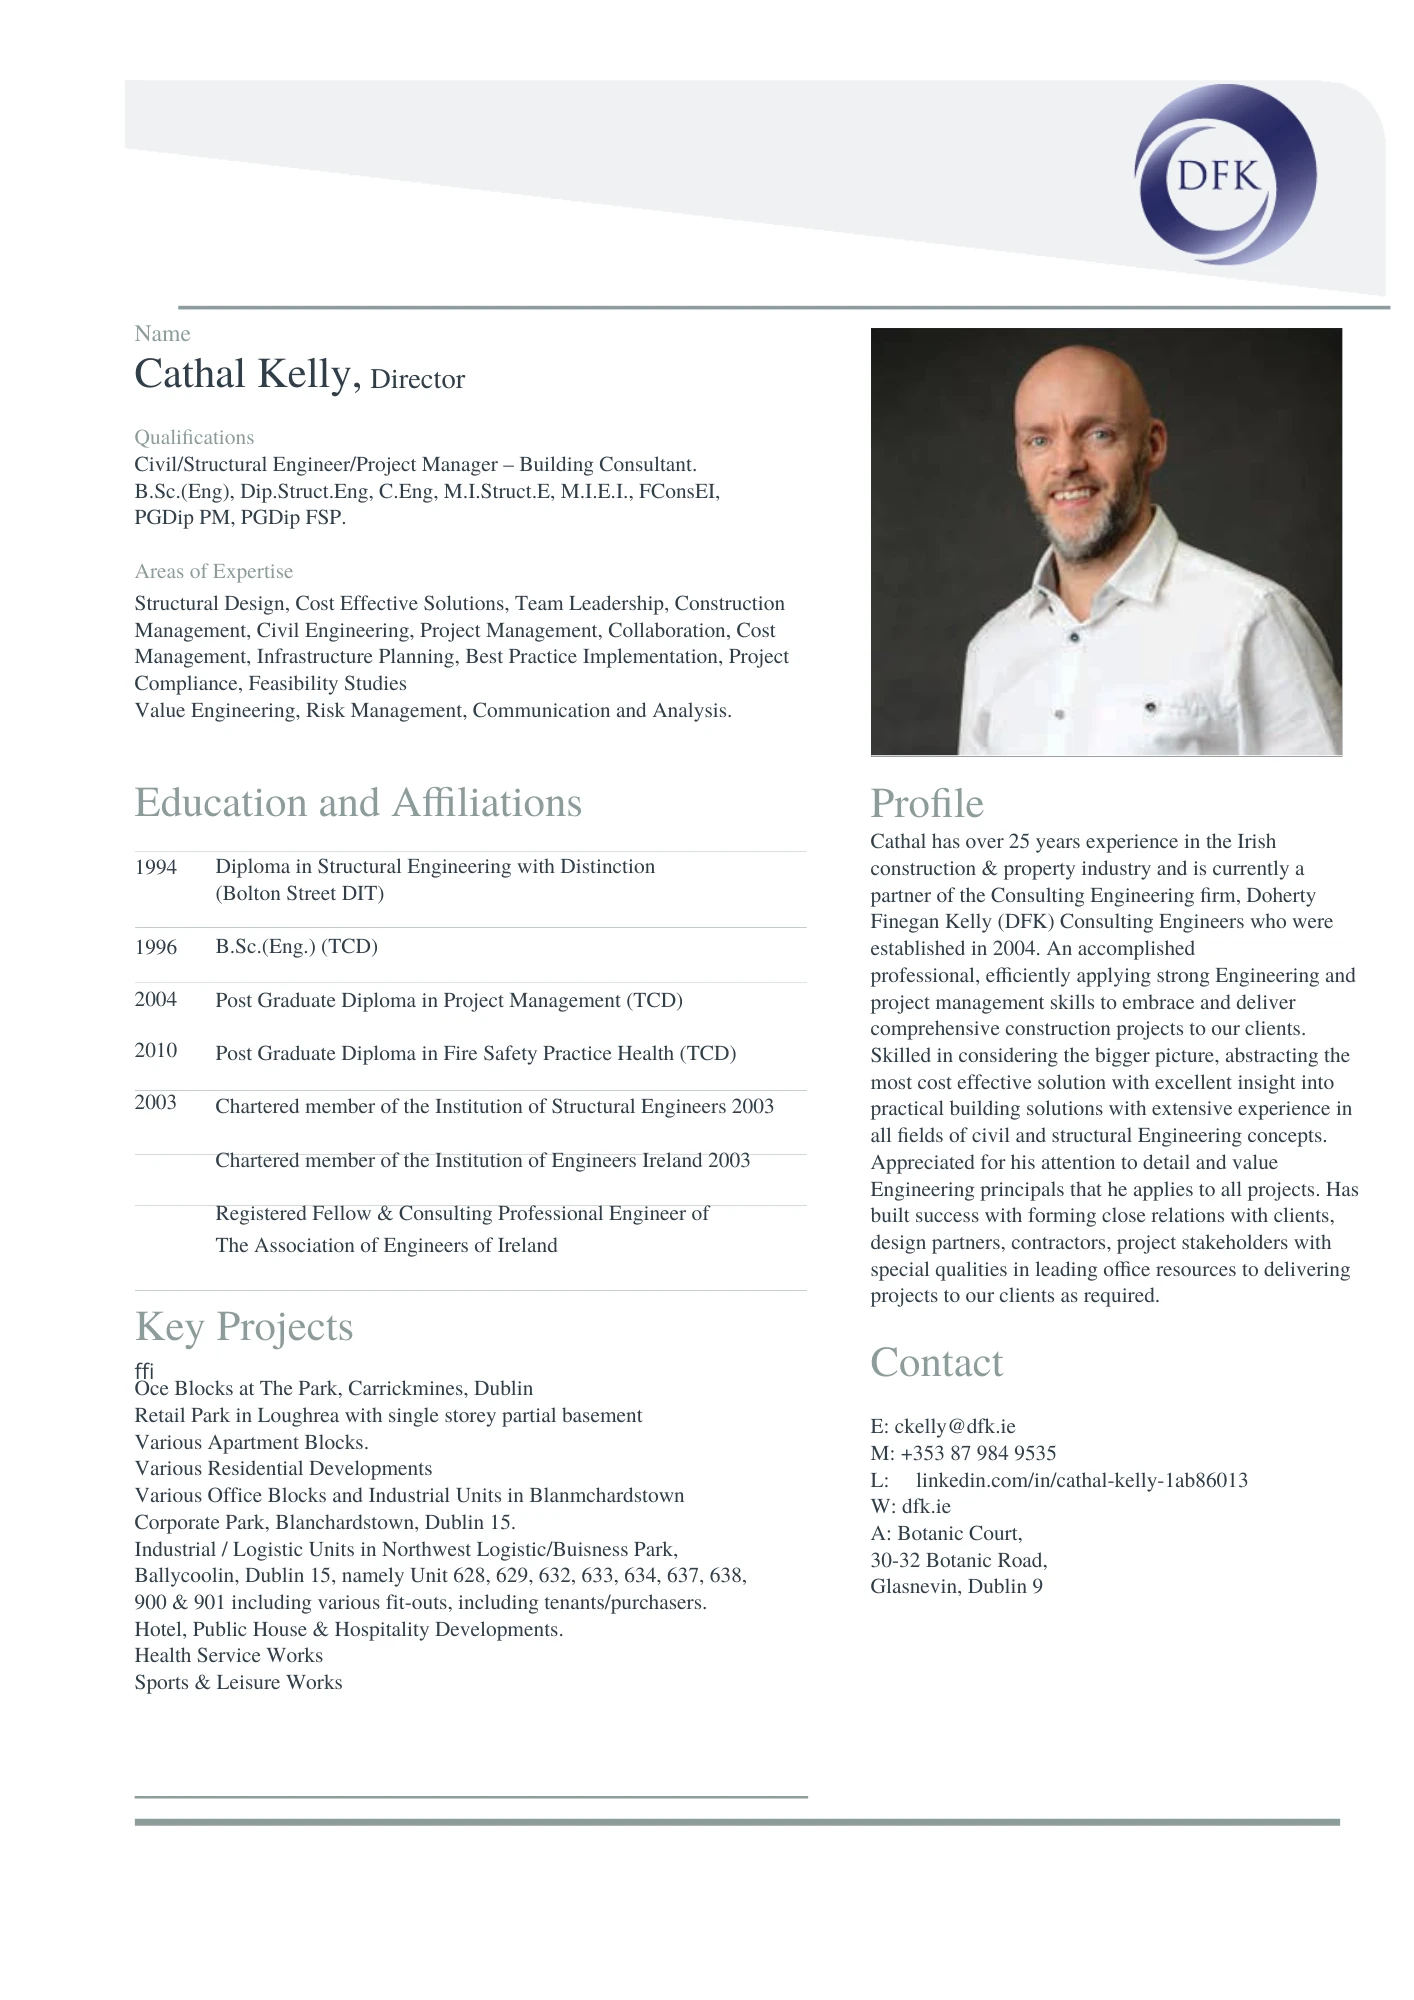 2210-cathal-kelly-director-dfk-1678474190835.png